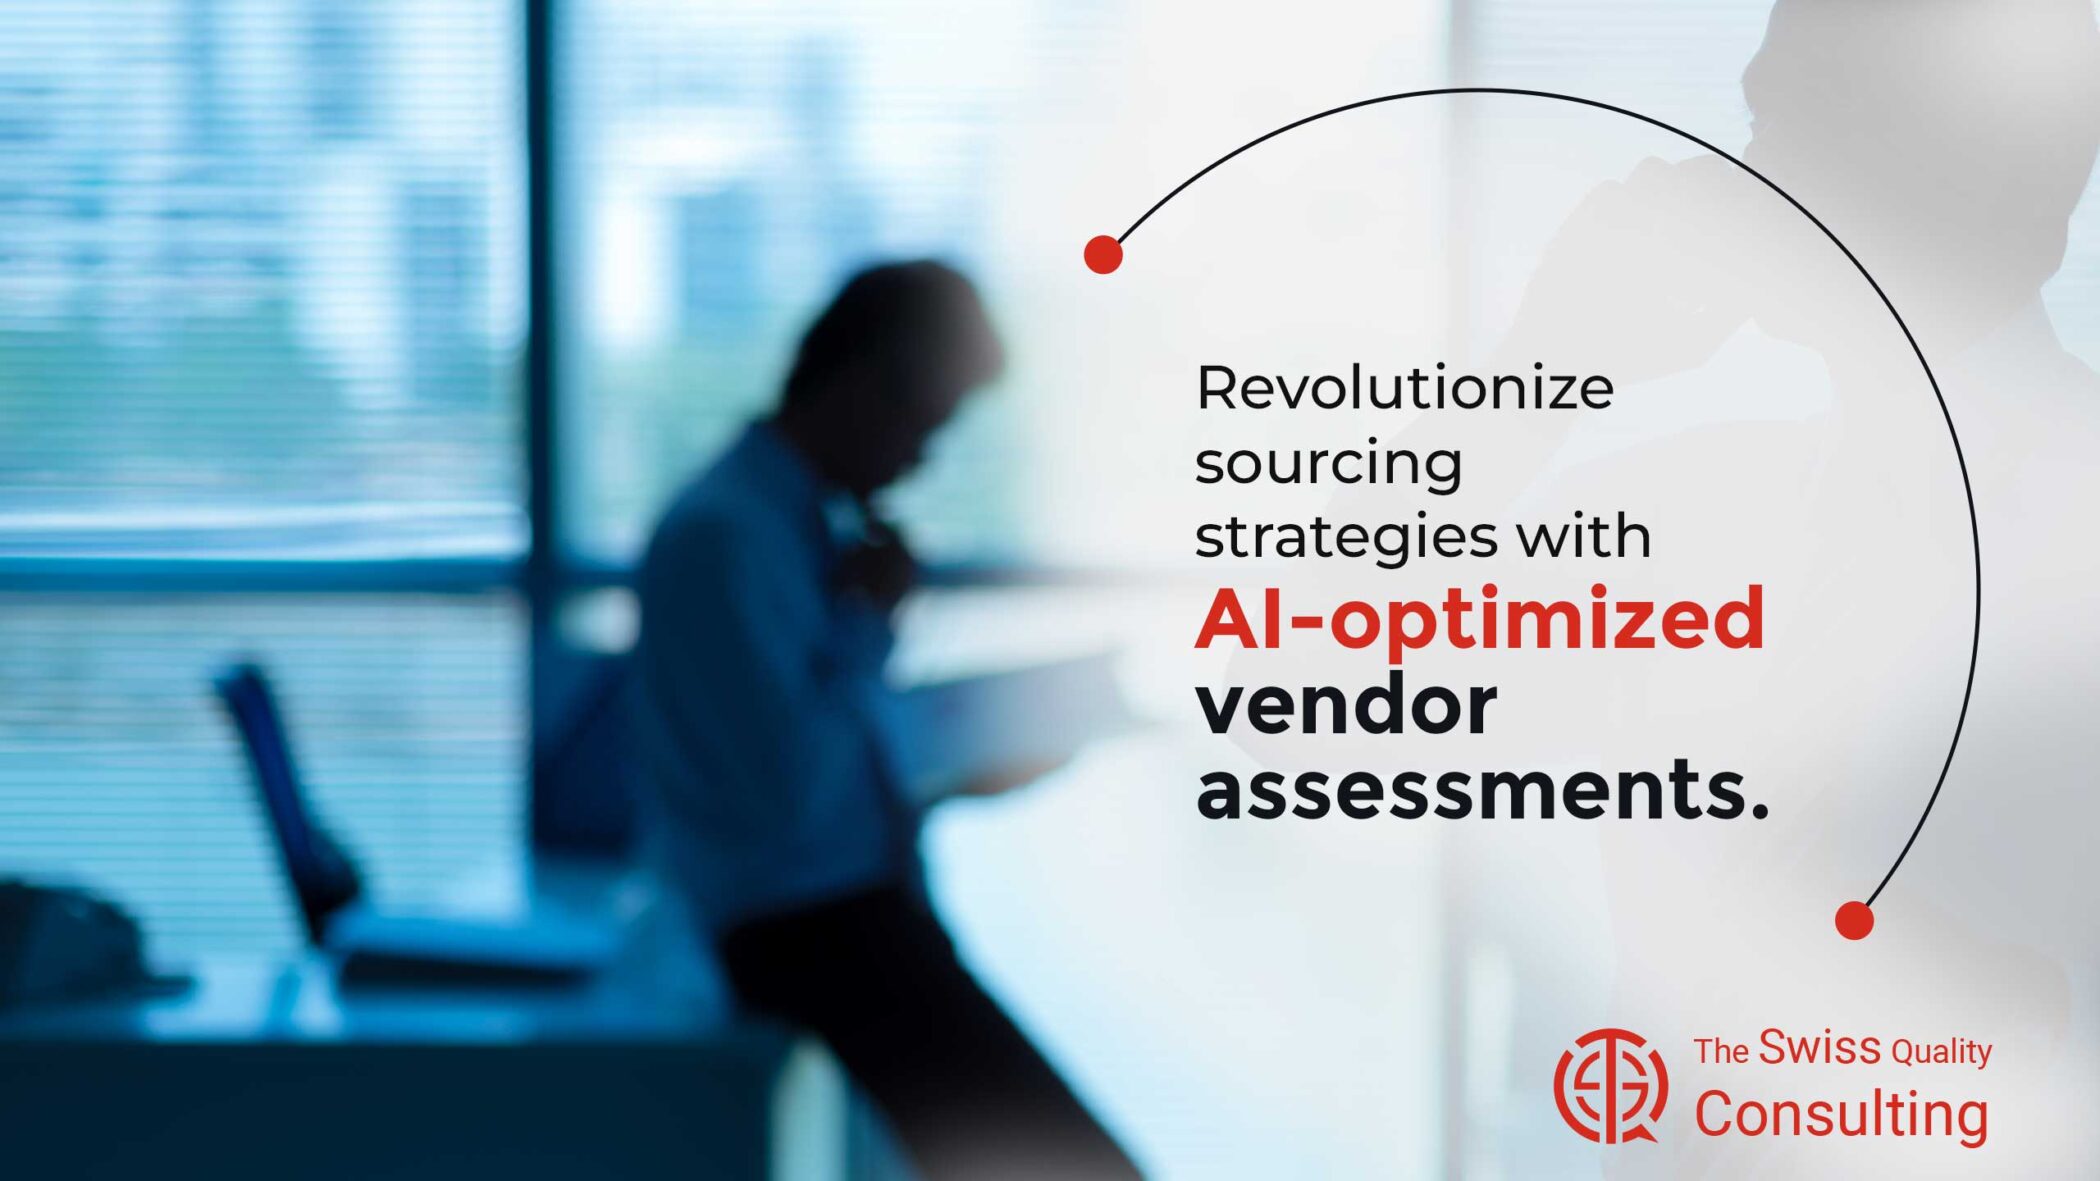 Revolutionize sourcing strategies with AI-optimized vendor assessments